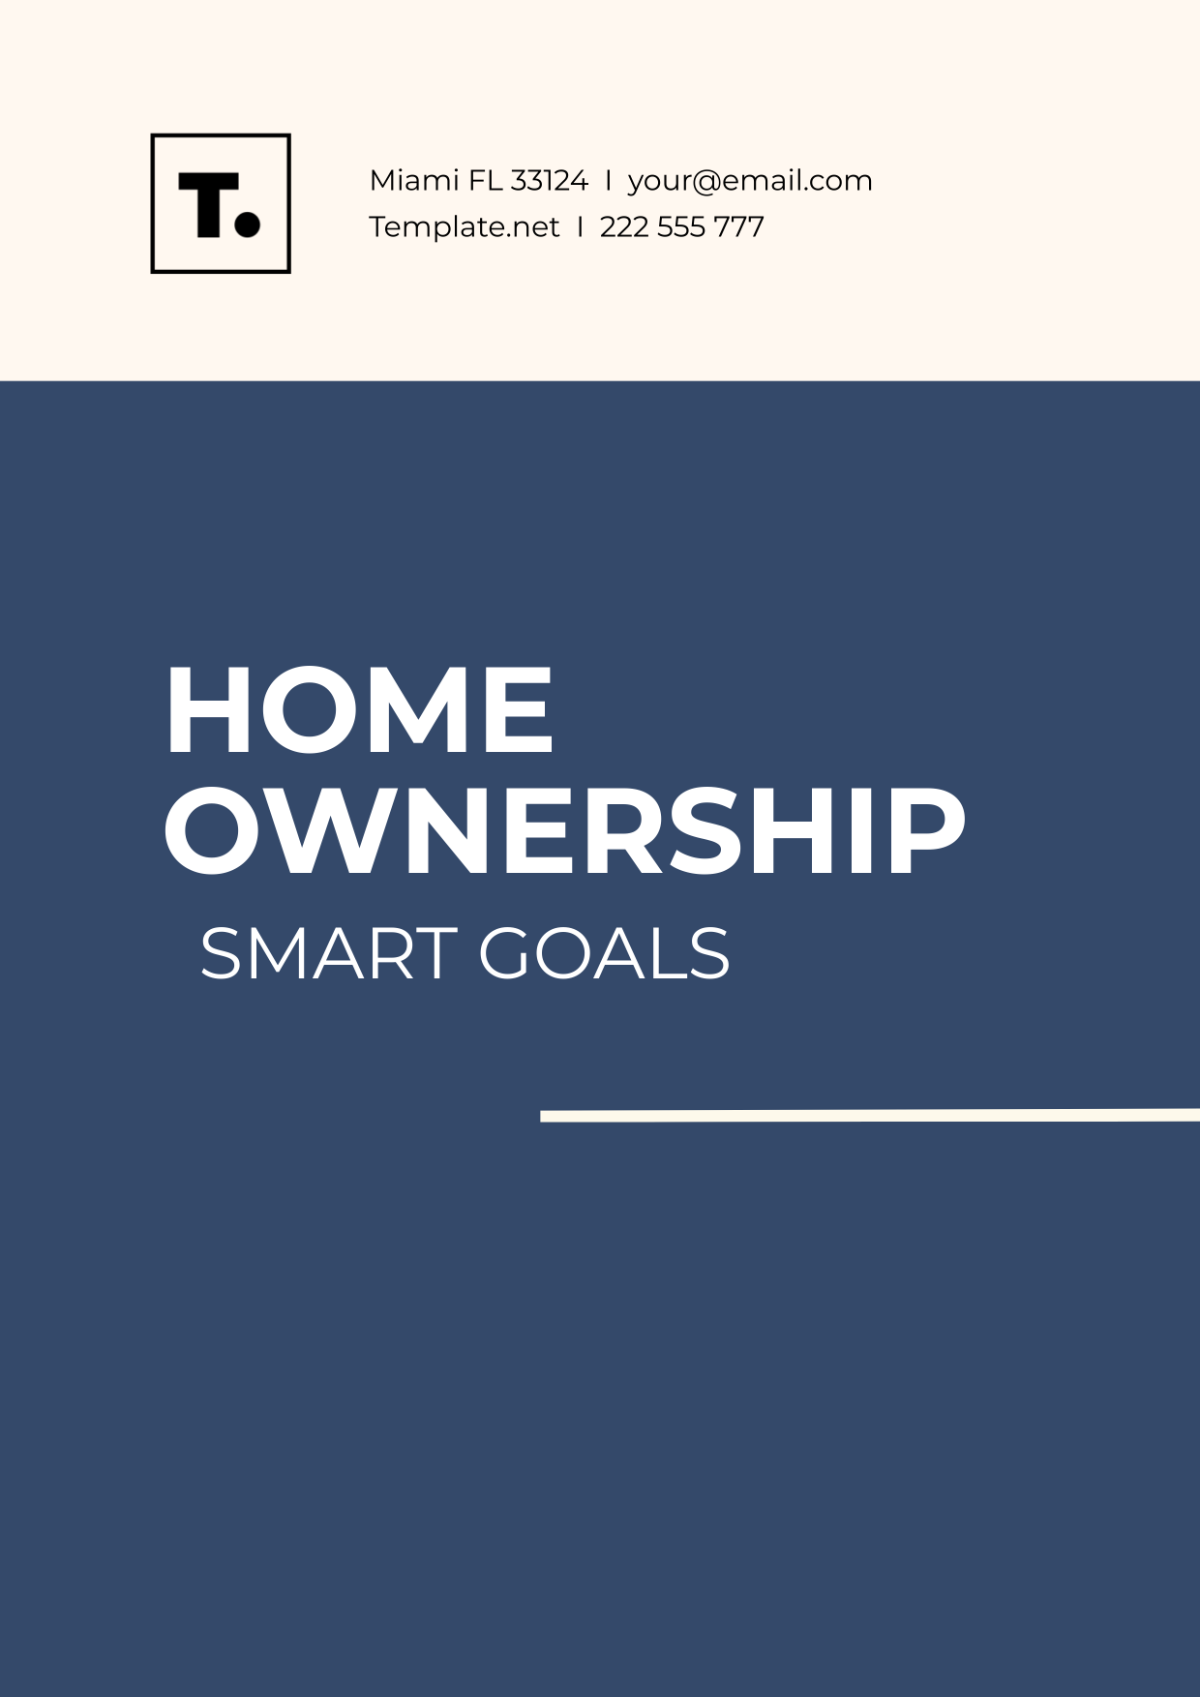 Free SMART Goals Template for Home Ownership